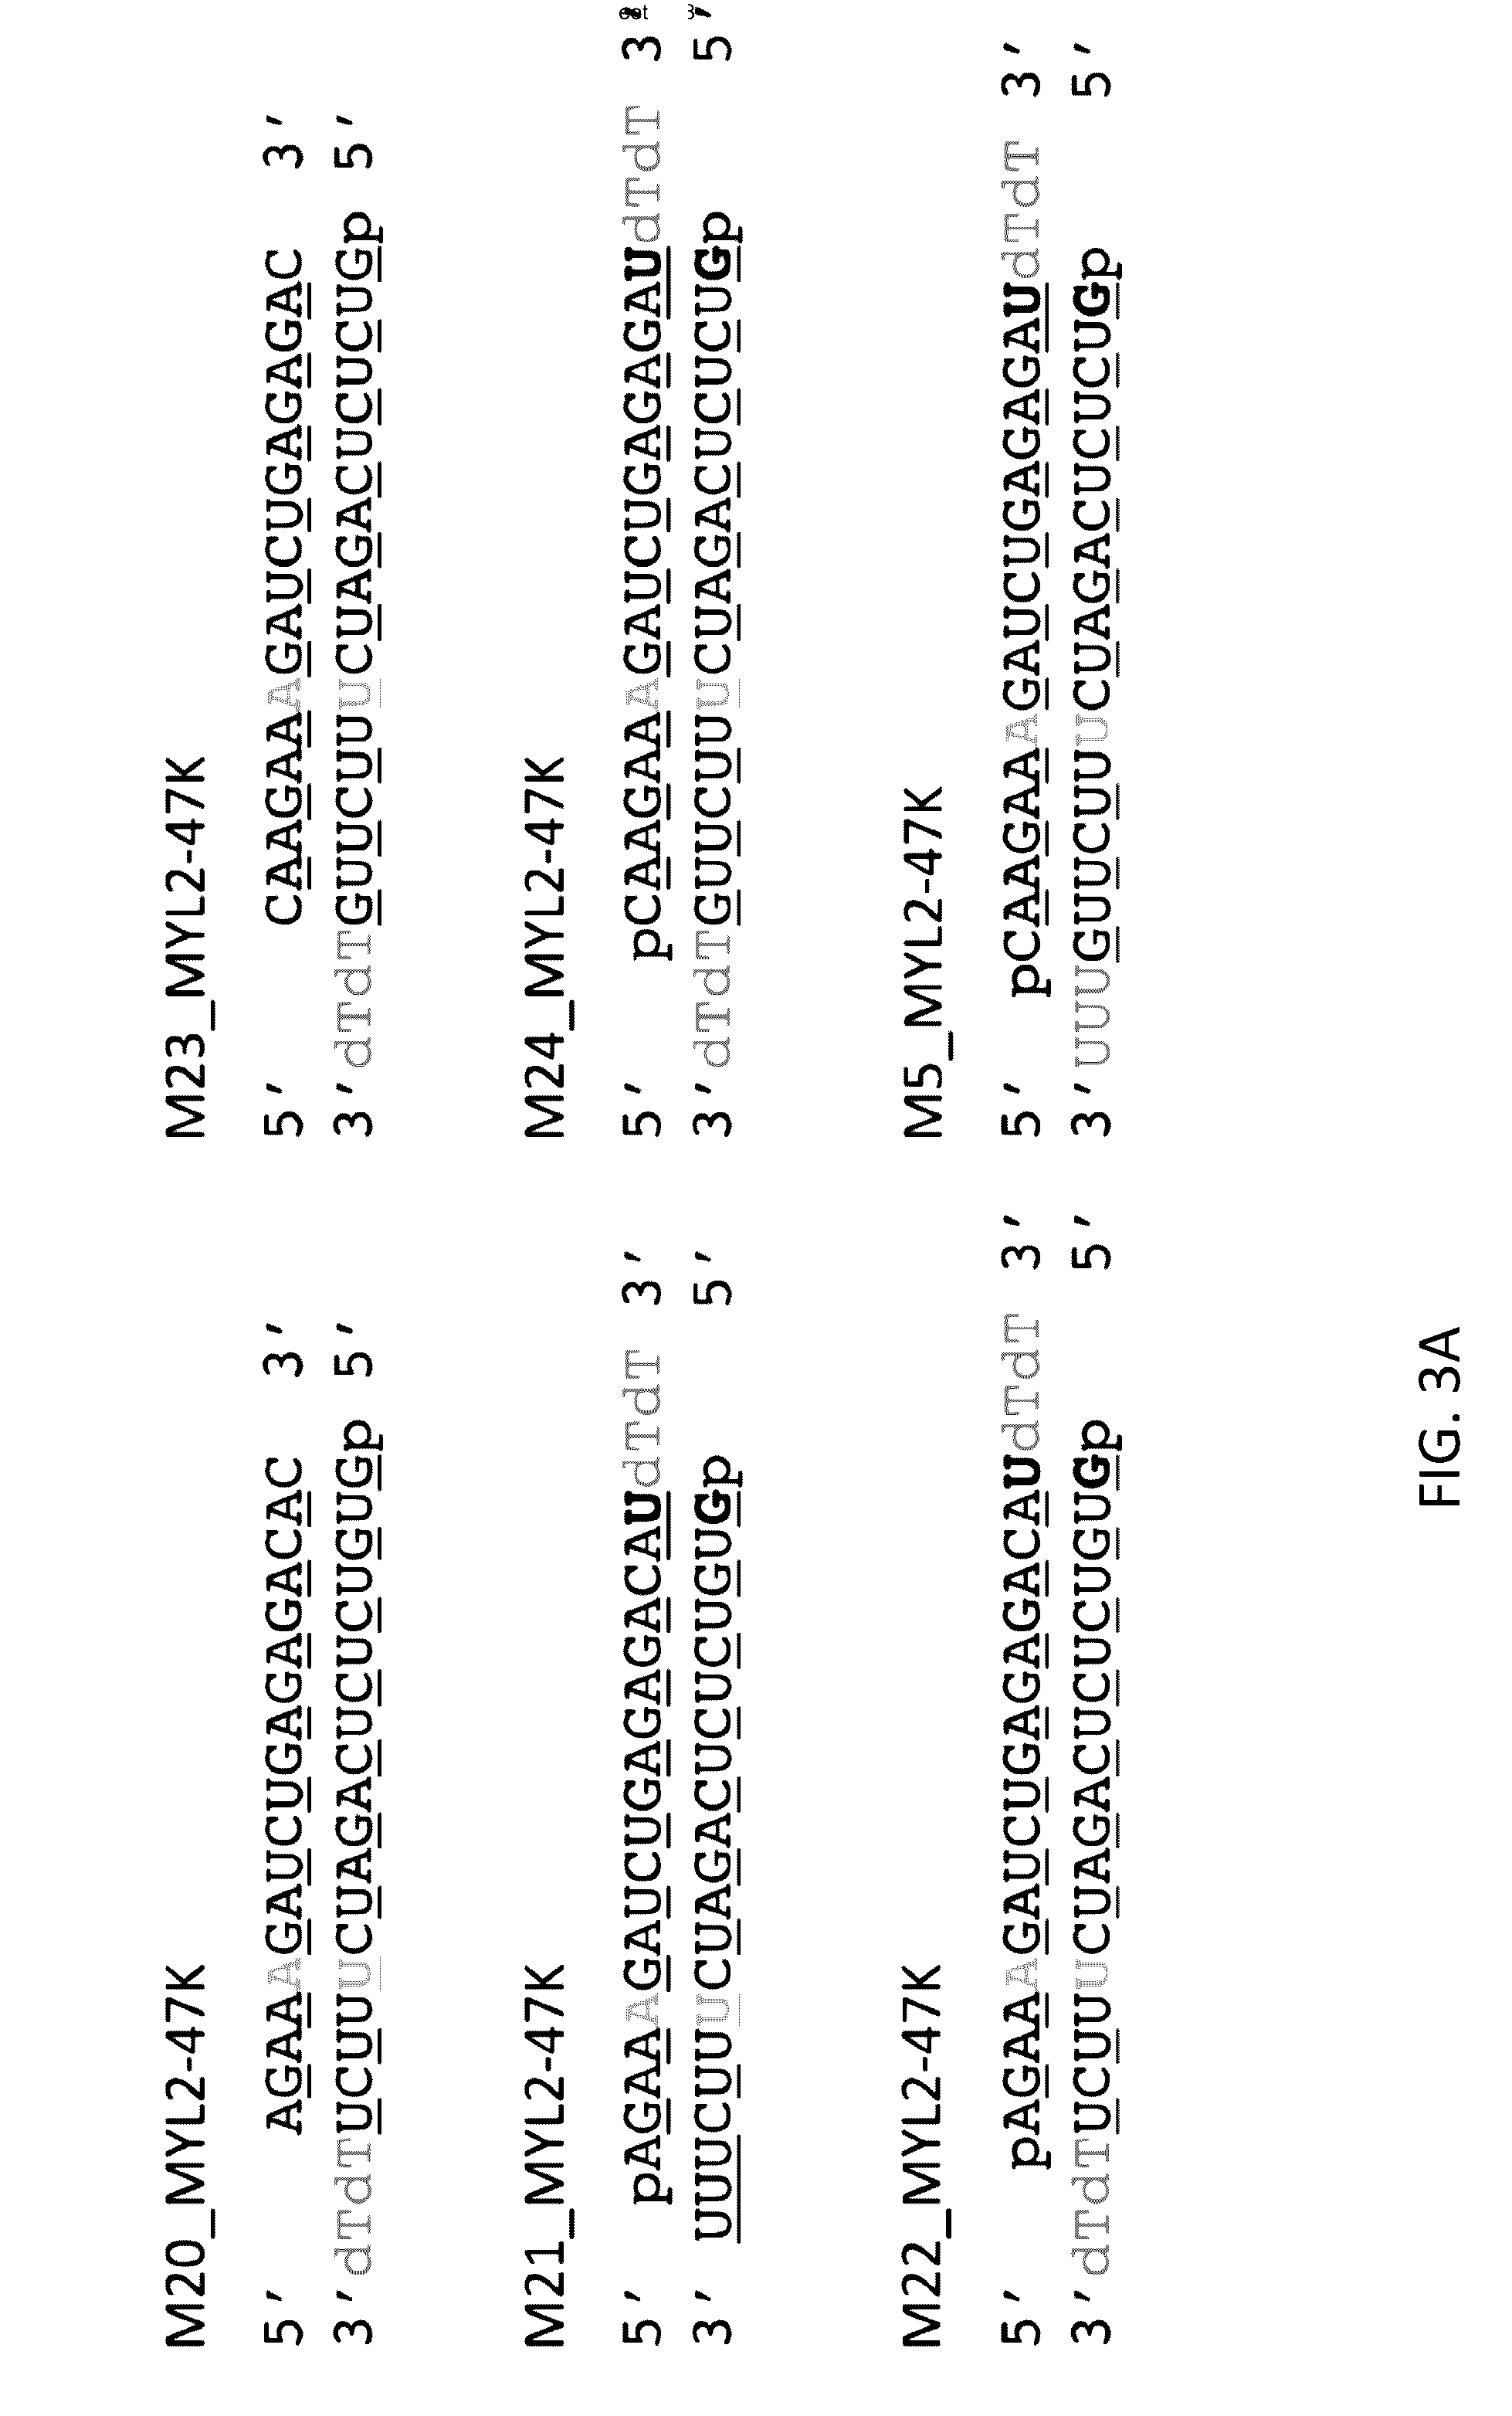 Oligonucleotides and Methods for Treatment of Cardiomyopathy Using RNA Interference